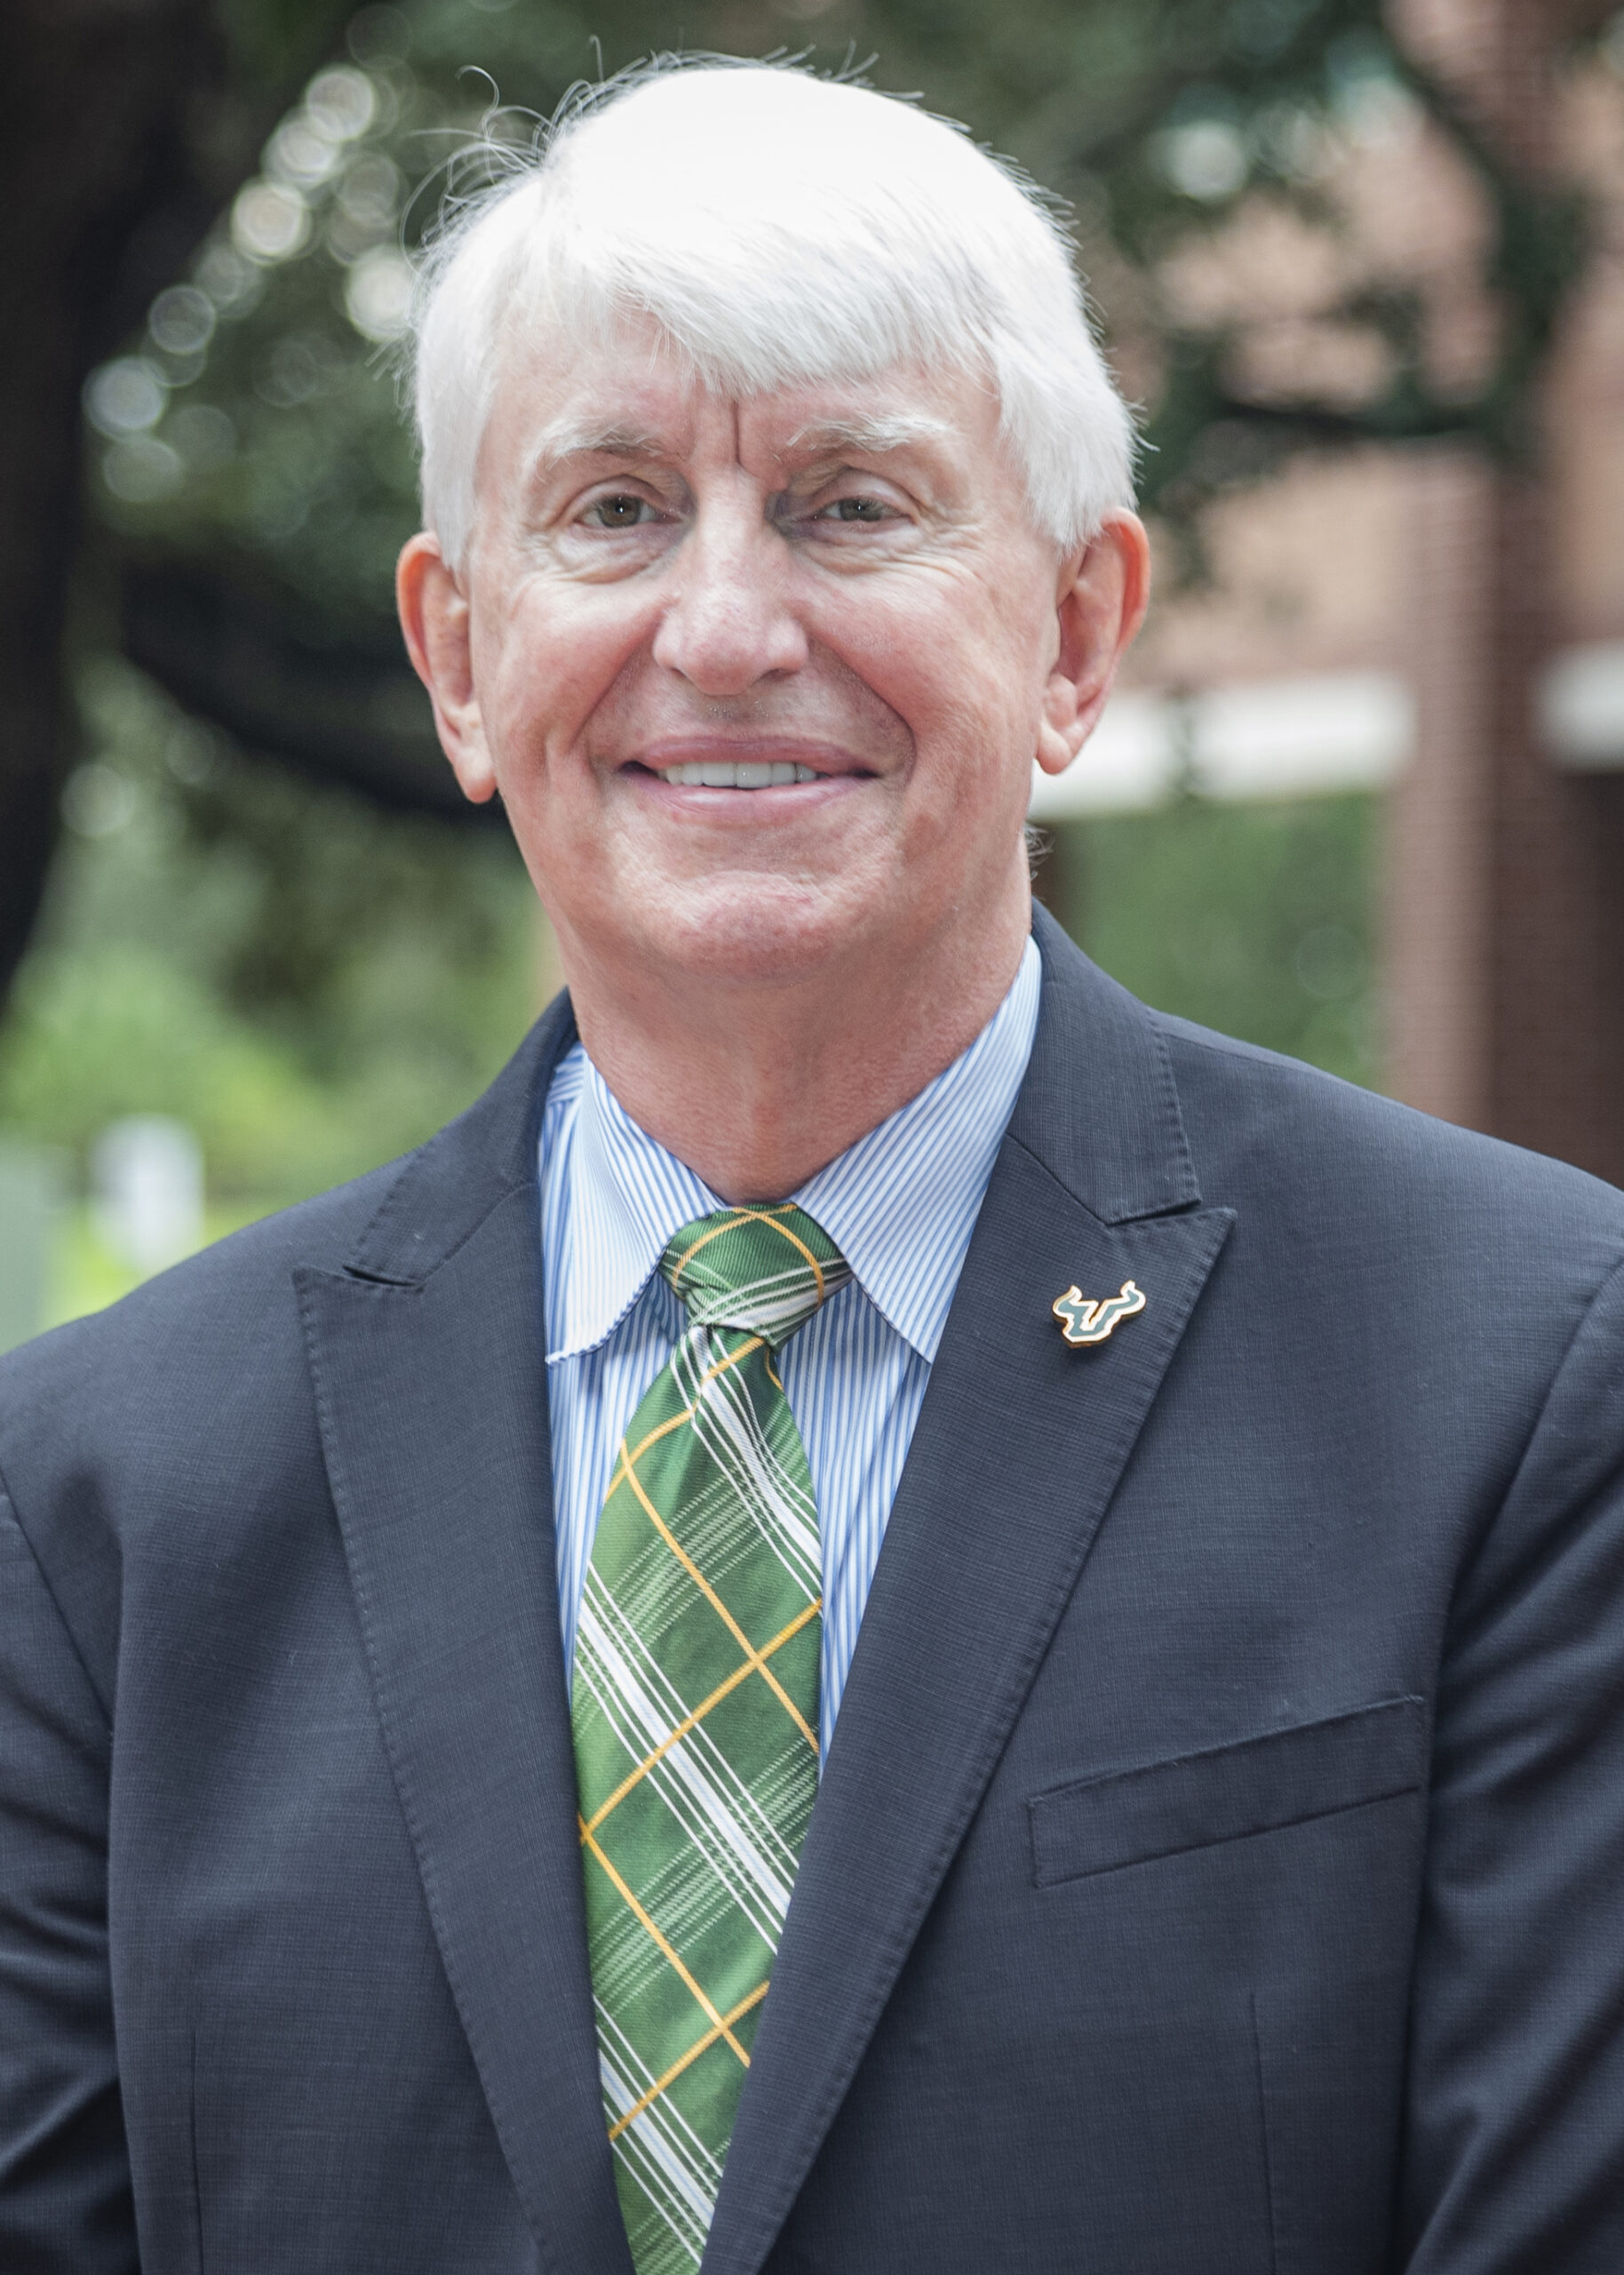 Provost Wilcox to step down from his role next year